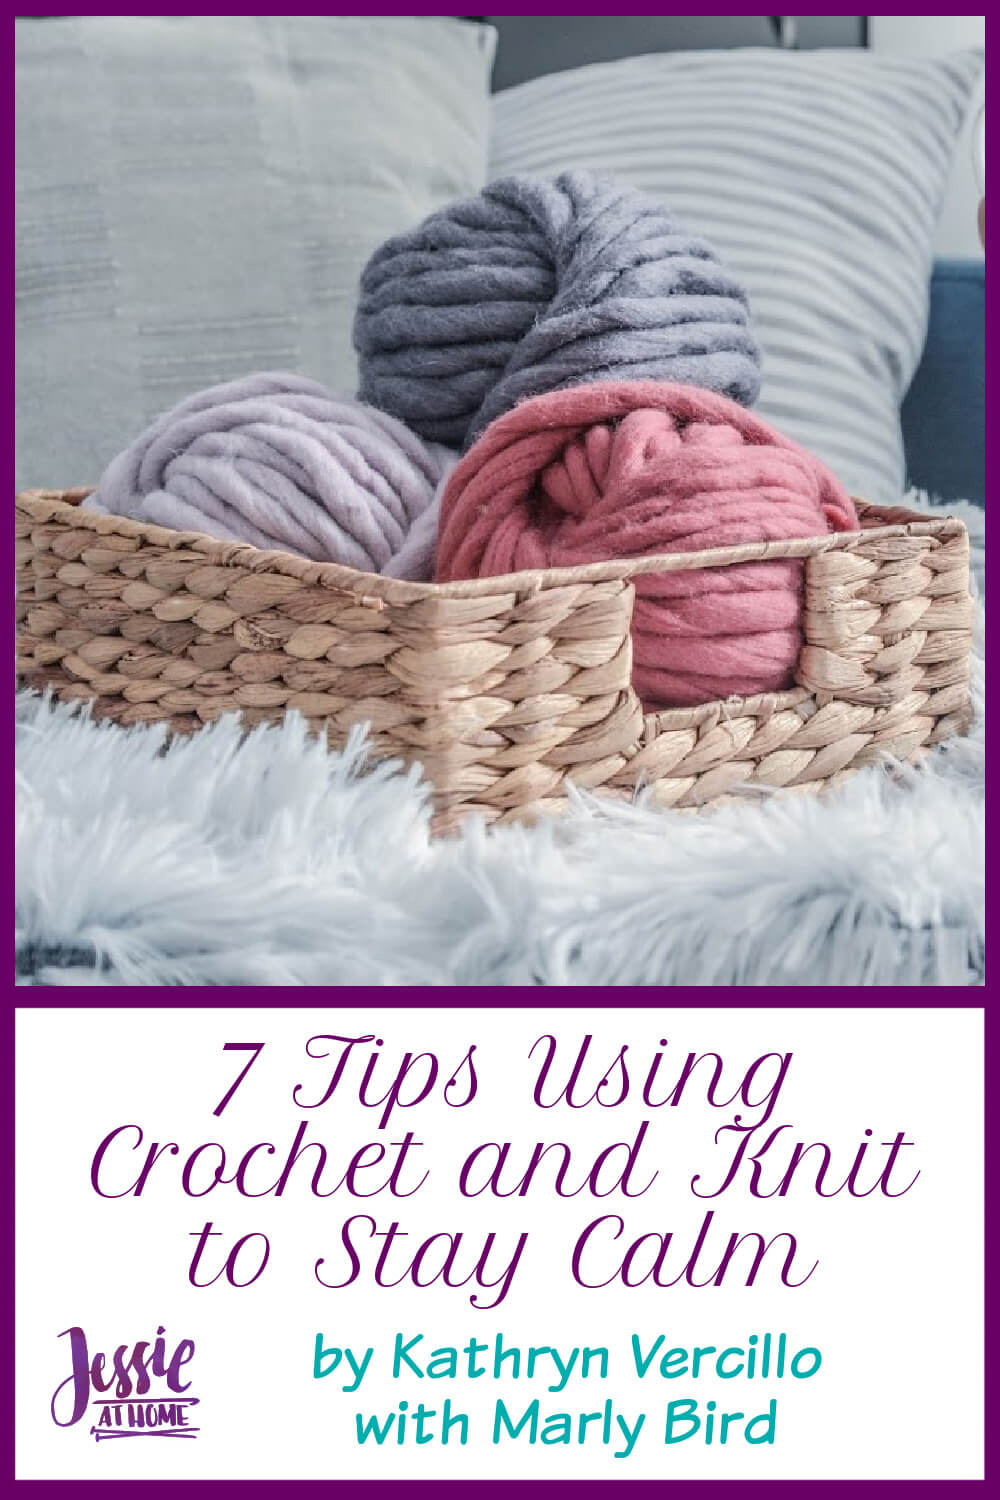 7 Tips for Using Crochet and Knitting to Stay Calm and Centered This Holiday Season